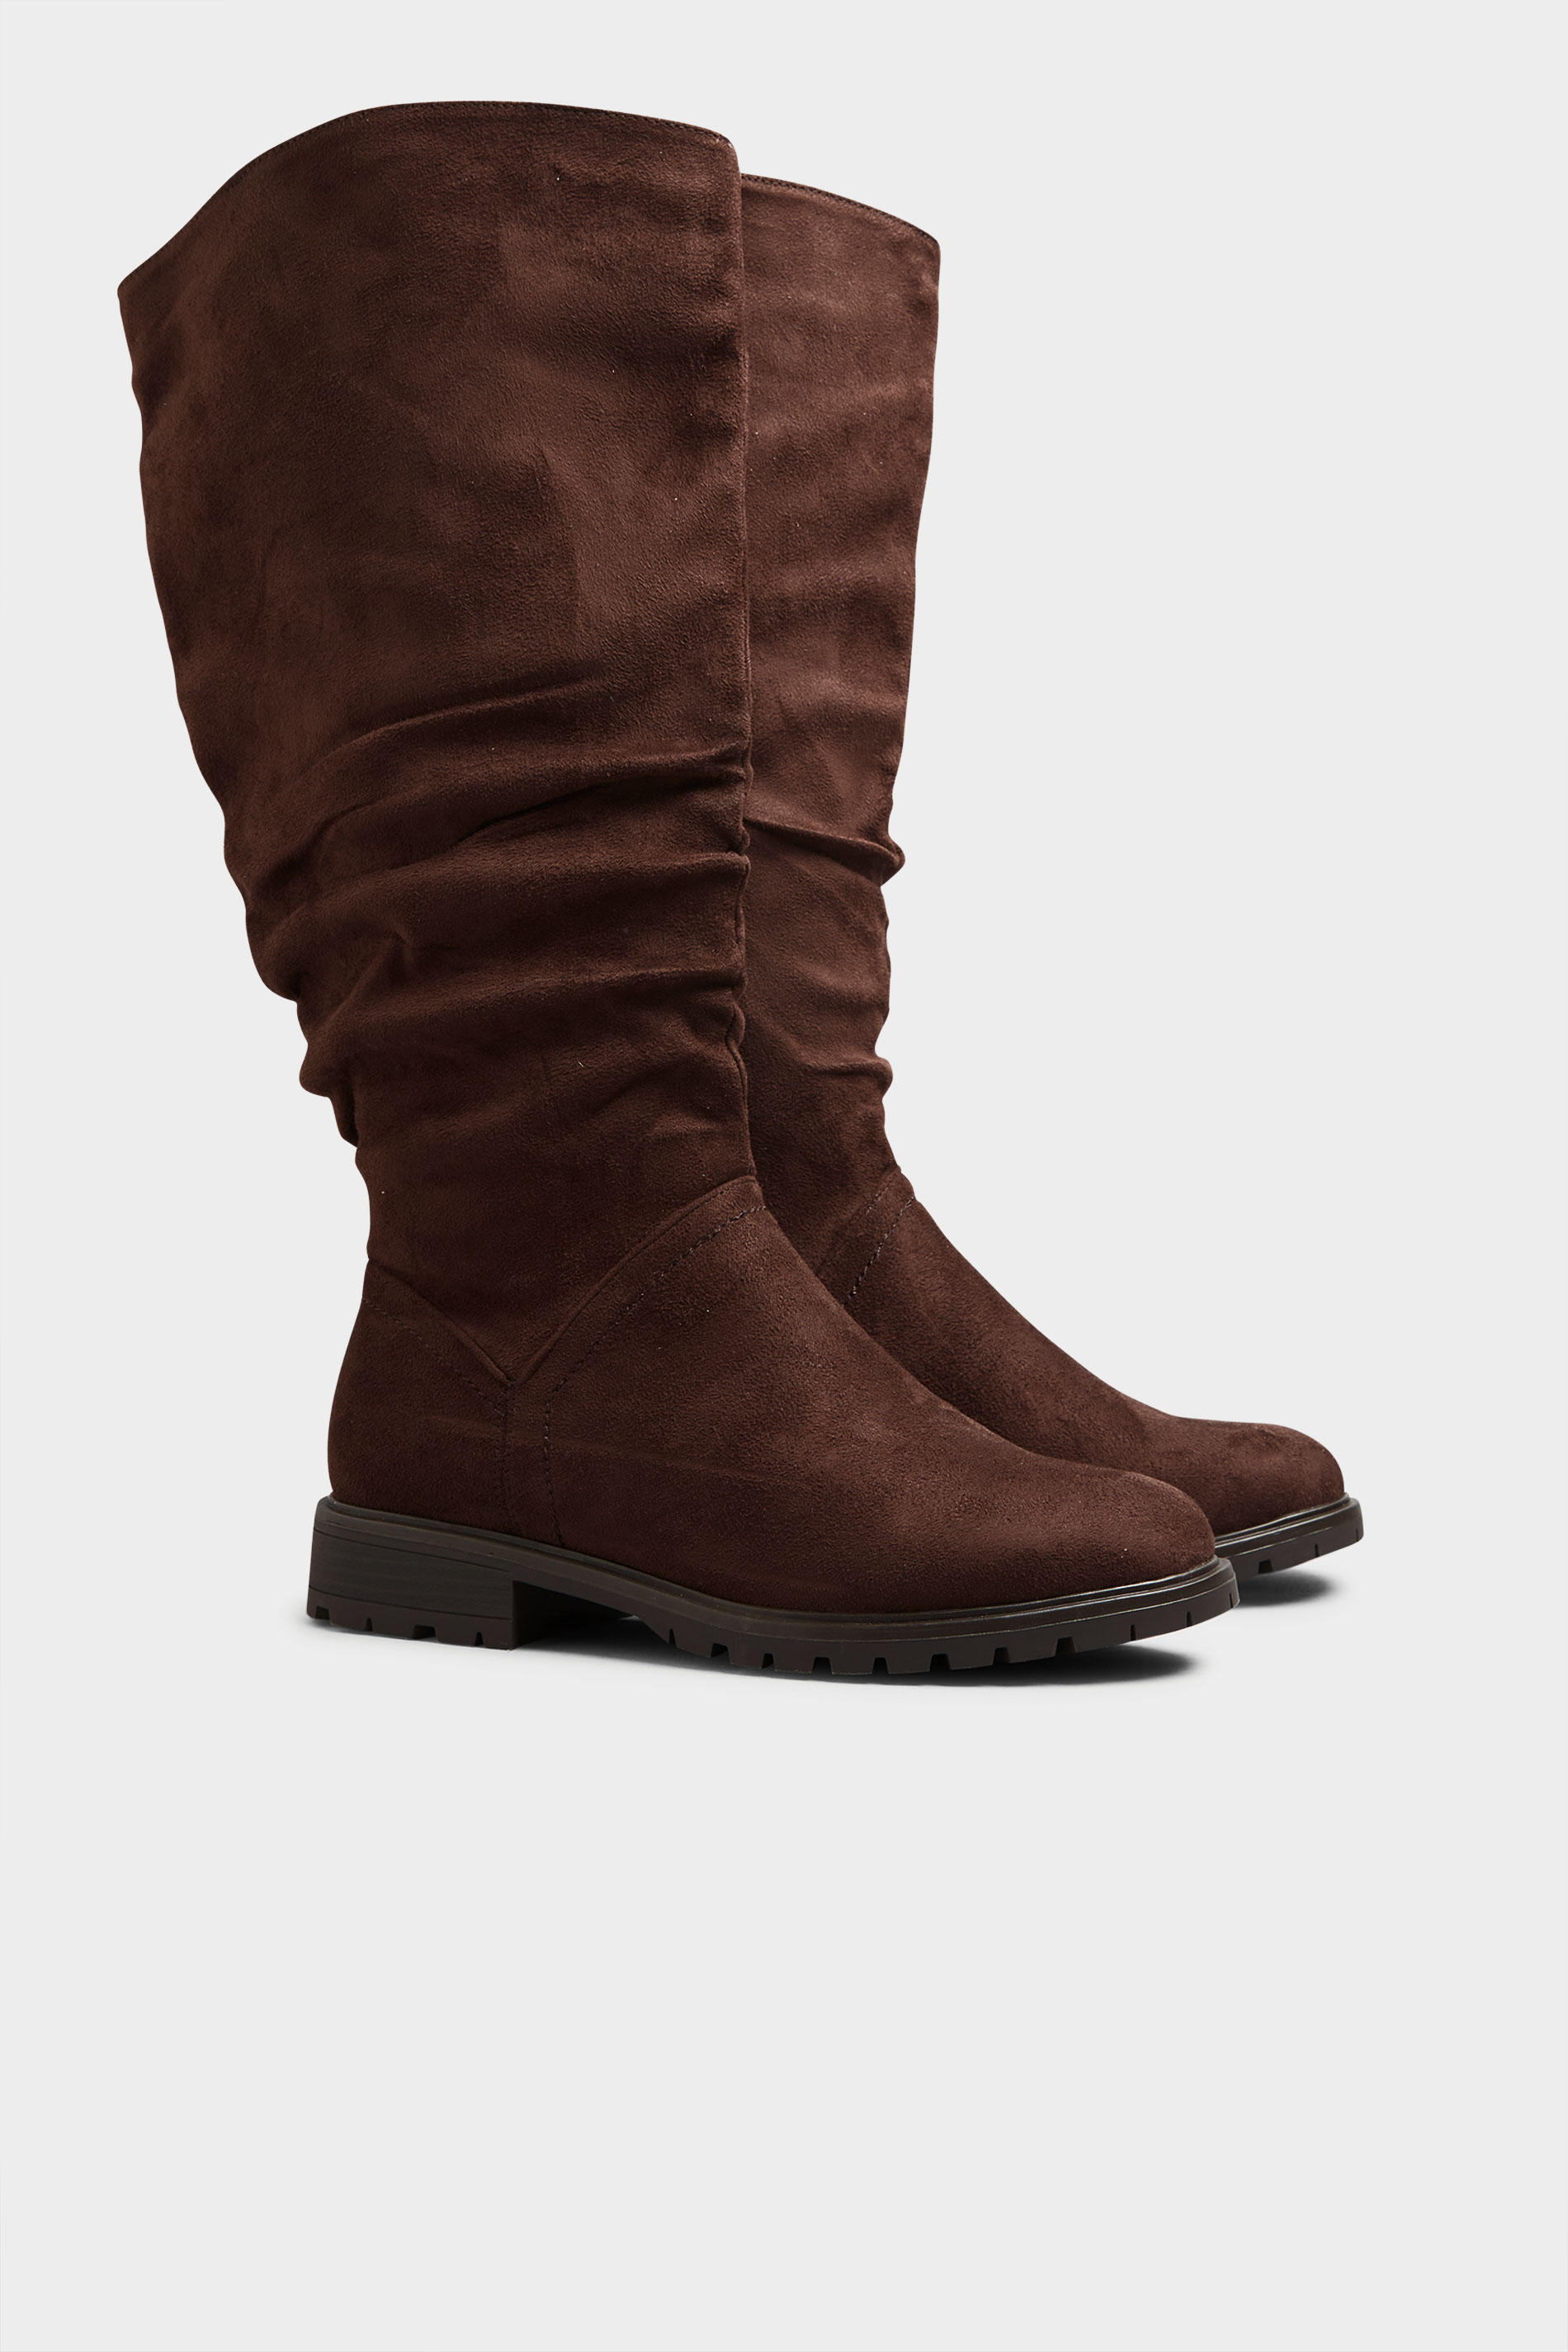 Chocolate Brown Ruched Cleated Boots In Extra Wide Fit_C.jpg